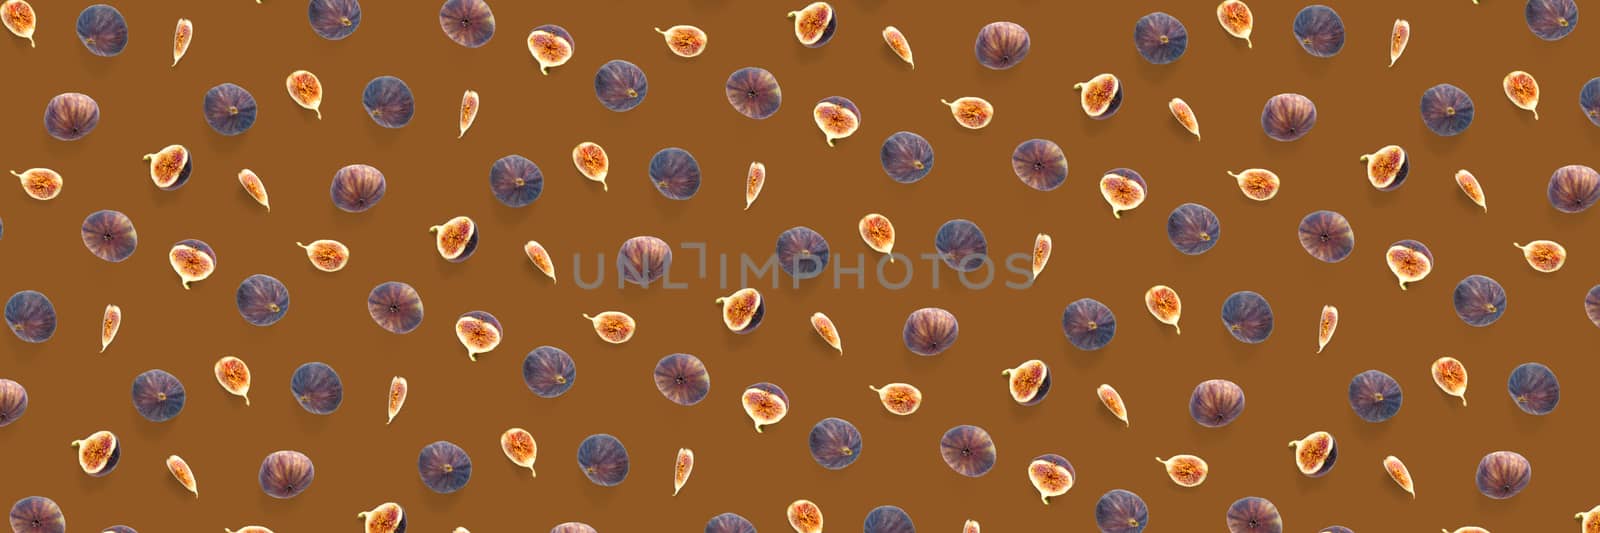 Background from Fresh figs. Food Photo. Modern fig fruits background. Creative set of the whole and sliced figs on a orange background, not pattern